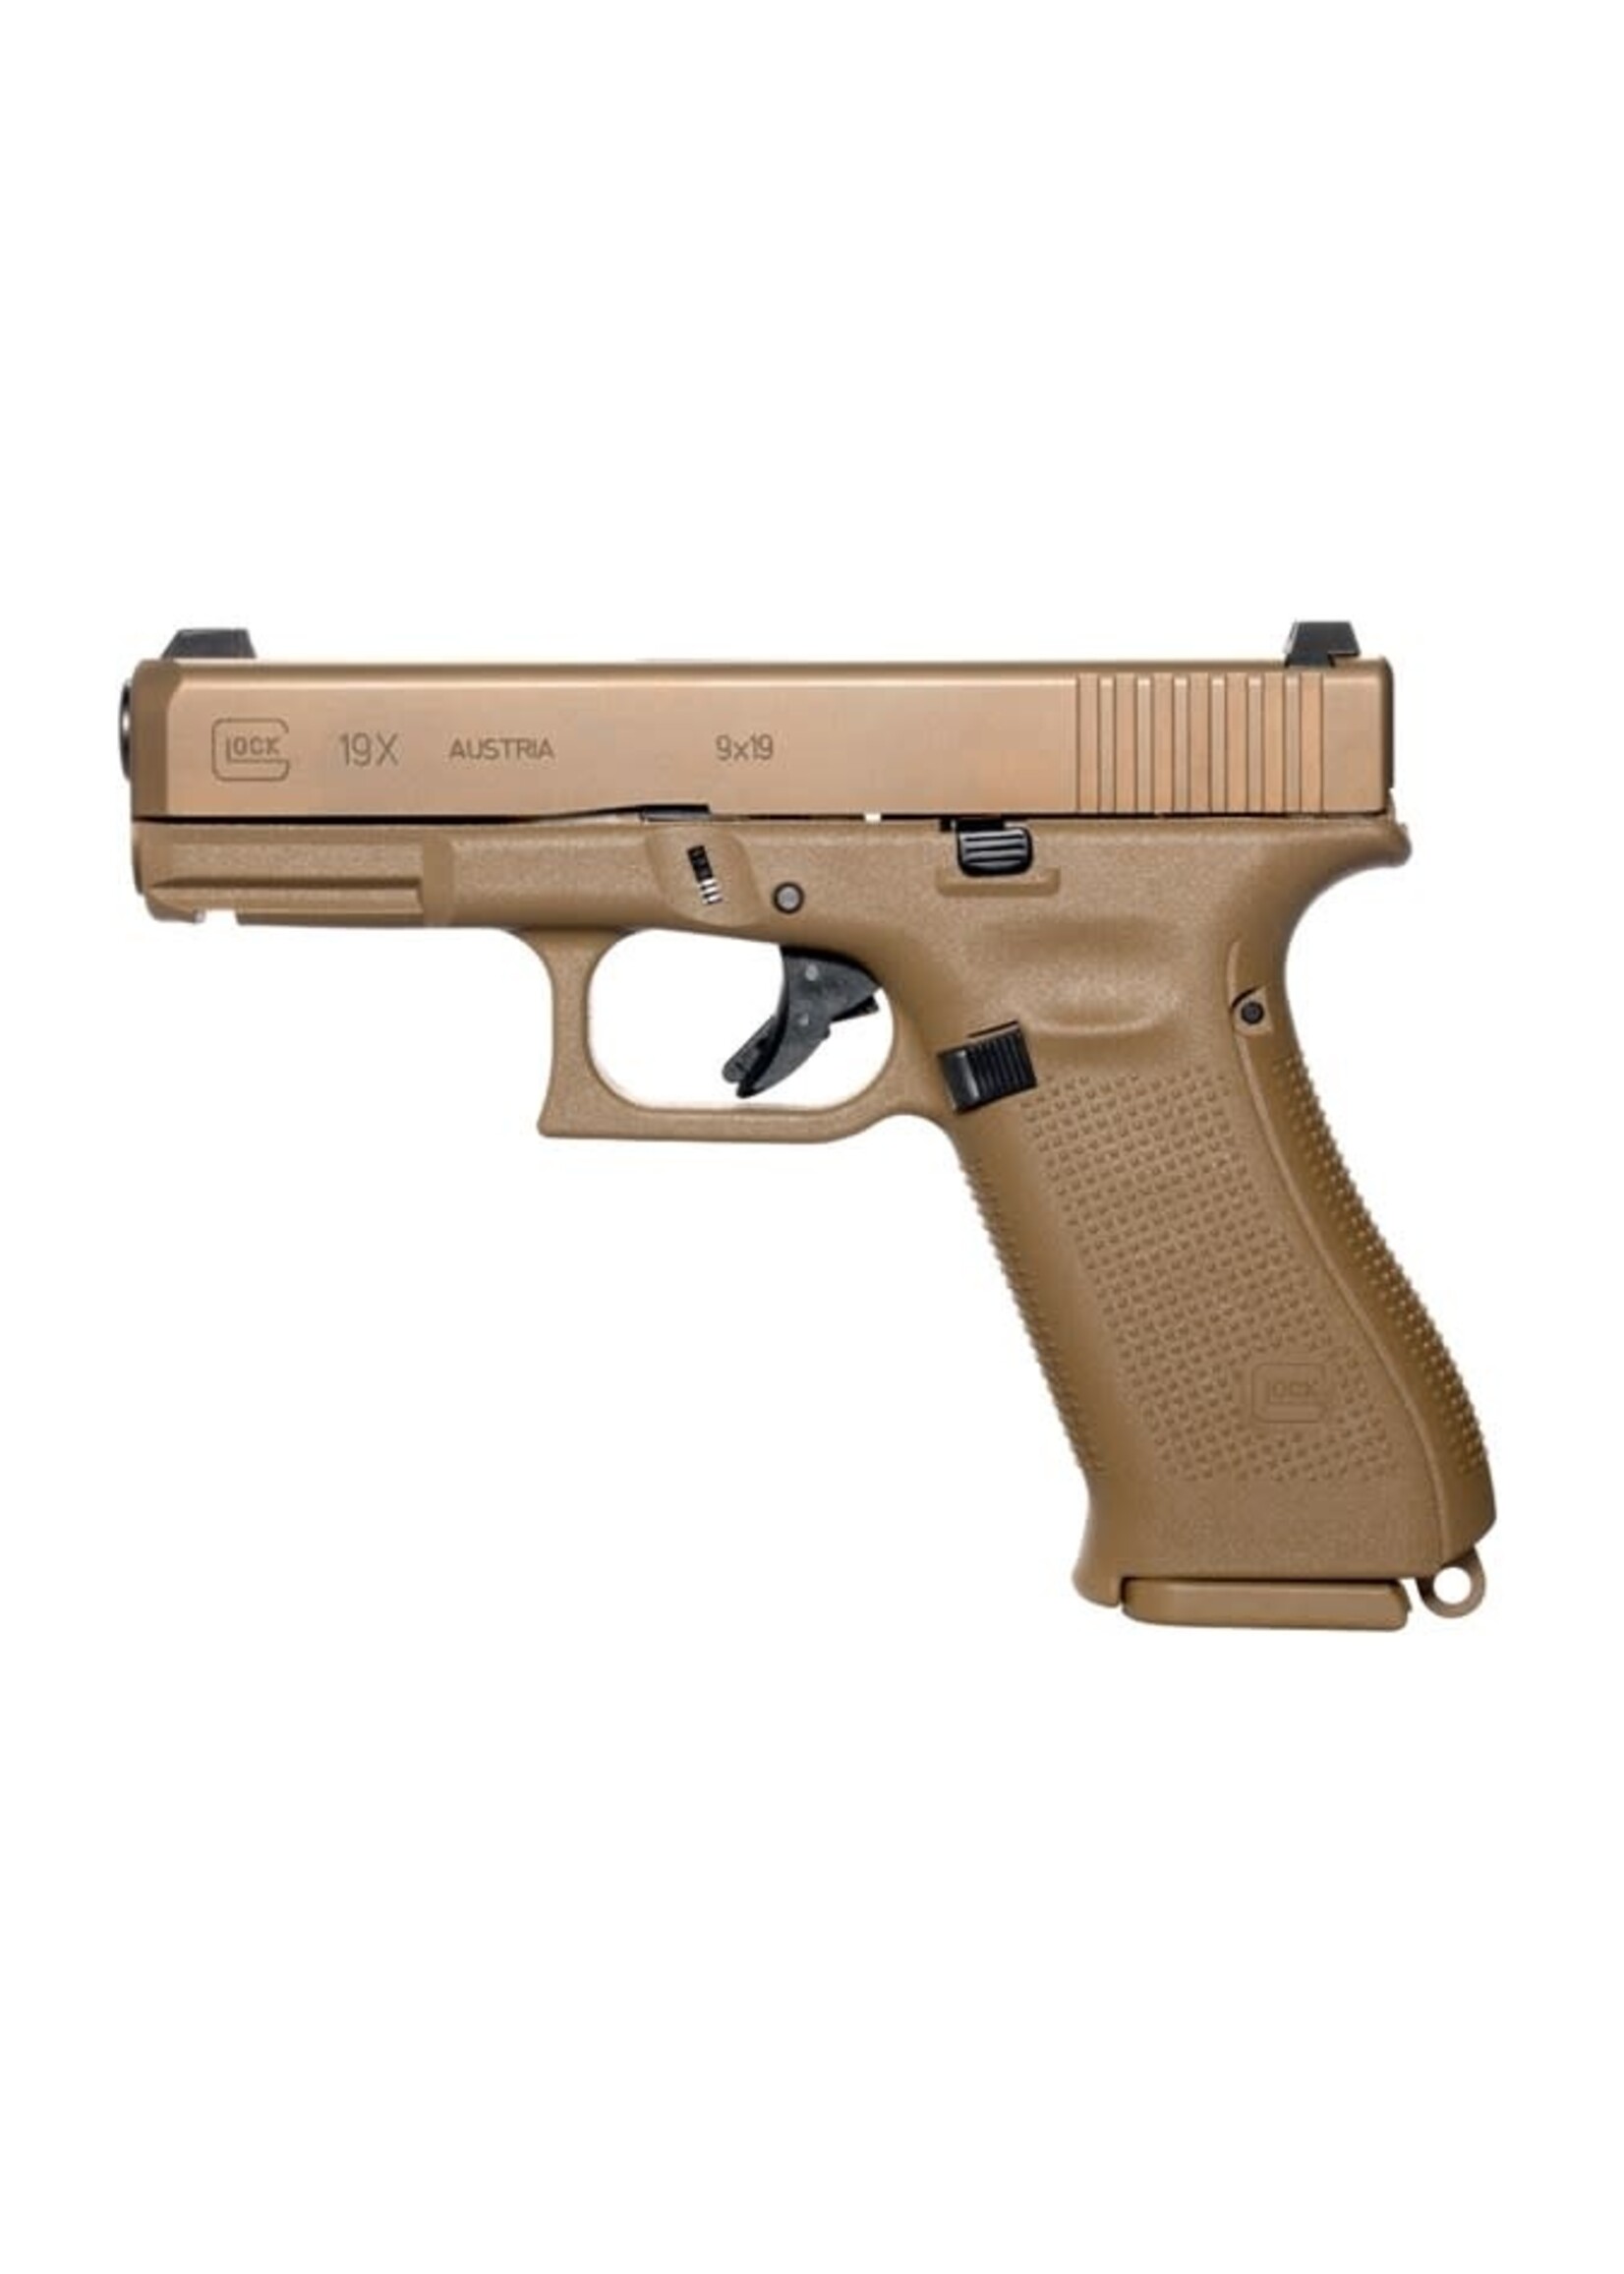 Glock Glock PX1950703 G19X Compact 9mm Luger 17+1/19+1 4.02" Black GMB Barrel, Coyote nPVD Serrated Slide, Coyote Brown Cerakote Polymer Frame w/Accessory Rail, Coyote Brown Textured Polymer Grip, Ambidextrous